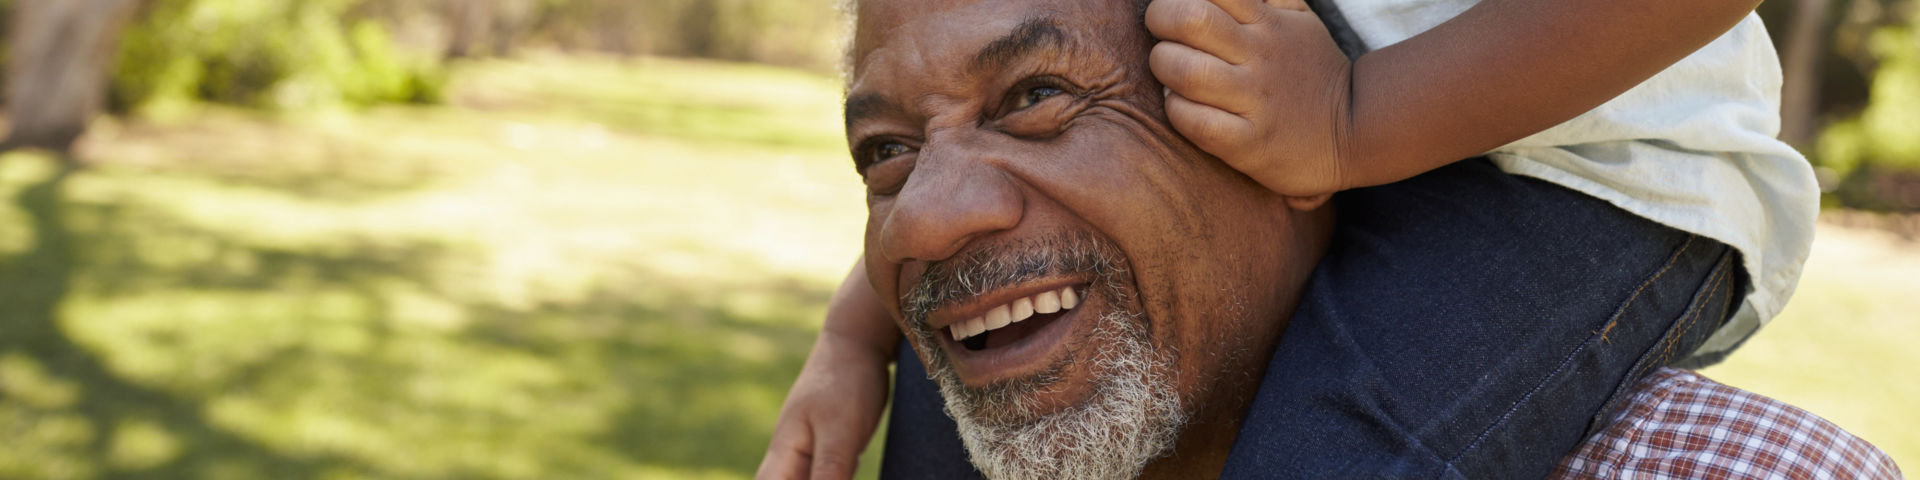 African american prostate risk